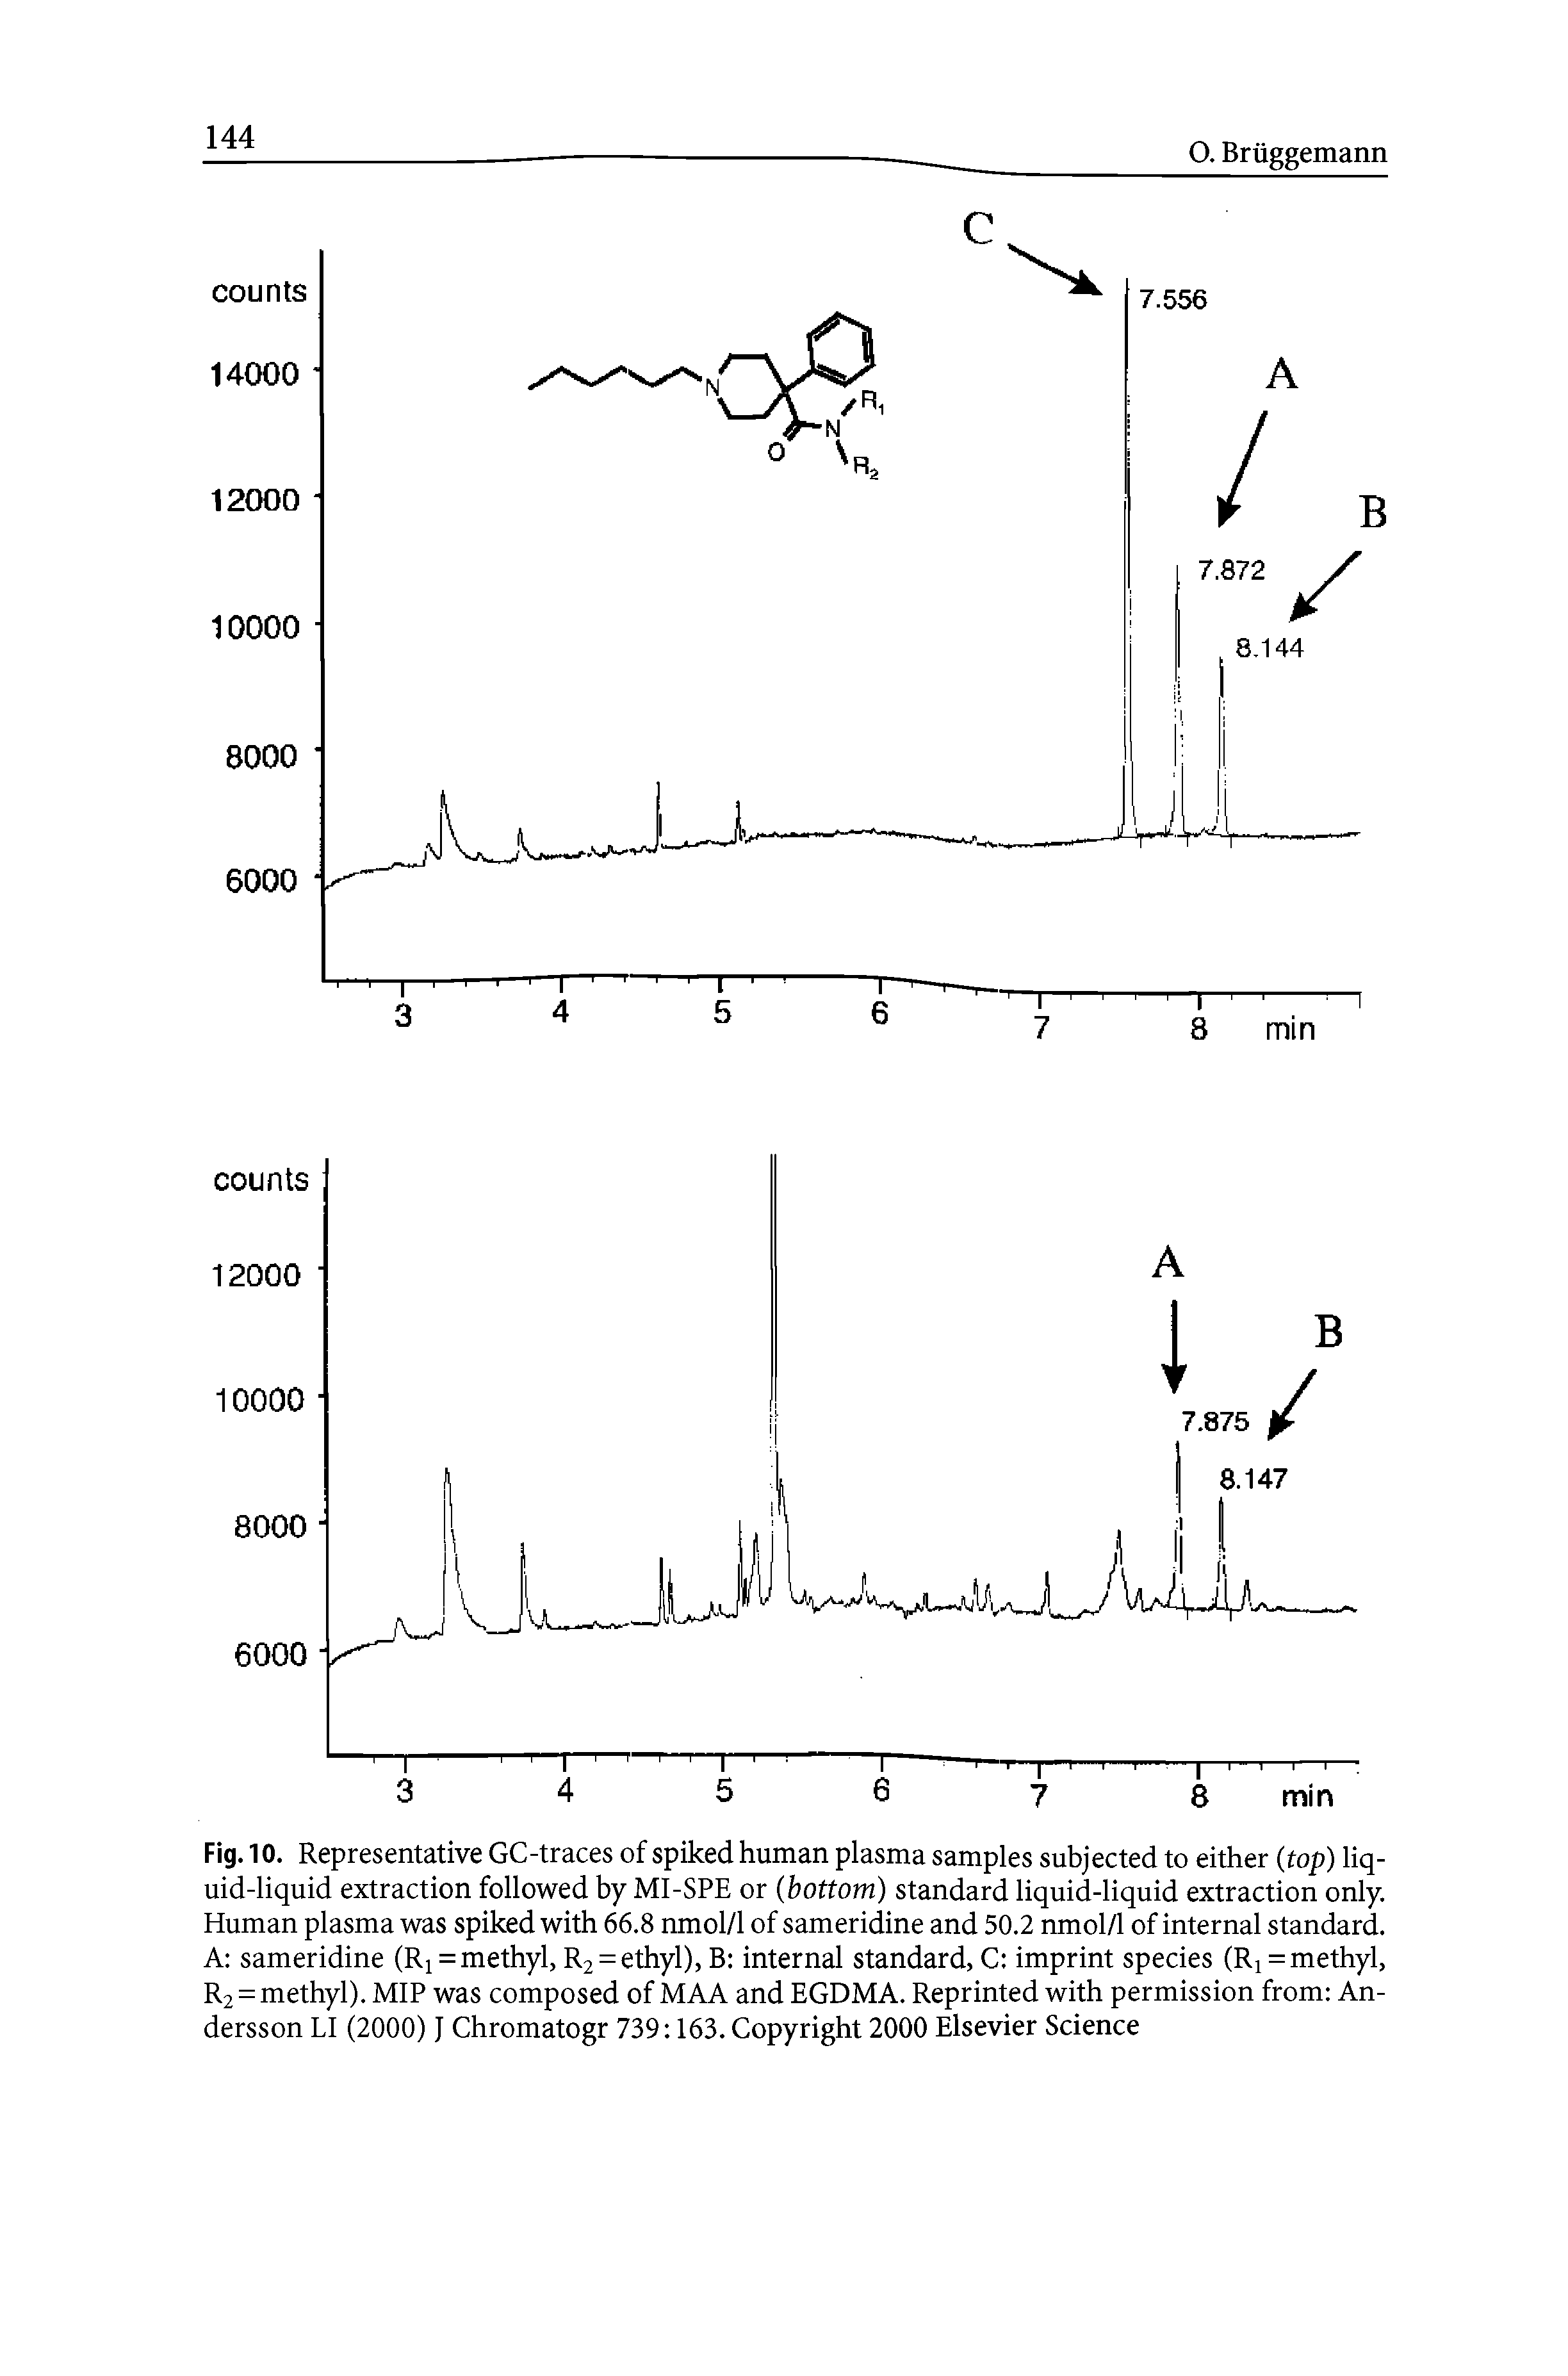 Fig. 10. Representative GC-traces of spiked human plasma samples subjected to either (top) liquid-liquid extraction followed by MI-SPE or (bottom) standard liquid-liquid extraction only. Human plasma was spiked with 66.8 nmol/1 of sameridine and 50.2 nmol/1 of internal standard. A sameridine (Ri = methyl, R2 = ethyl), B internal standard, C imprint species (Rx = methyl, R2 = methyl). MIP was composed of MAA and EGDMA. Reprinted with permission from An-dersson LI (2000) J Chromatogr 739 163. Copyright 2000 Elsevier Science...